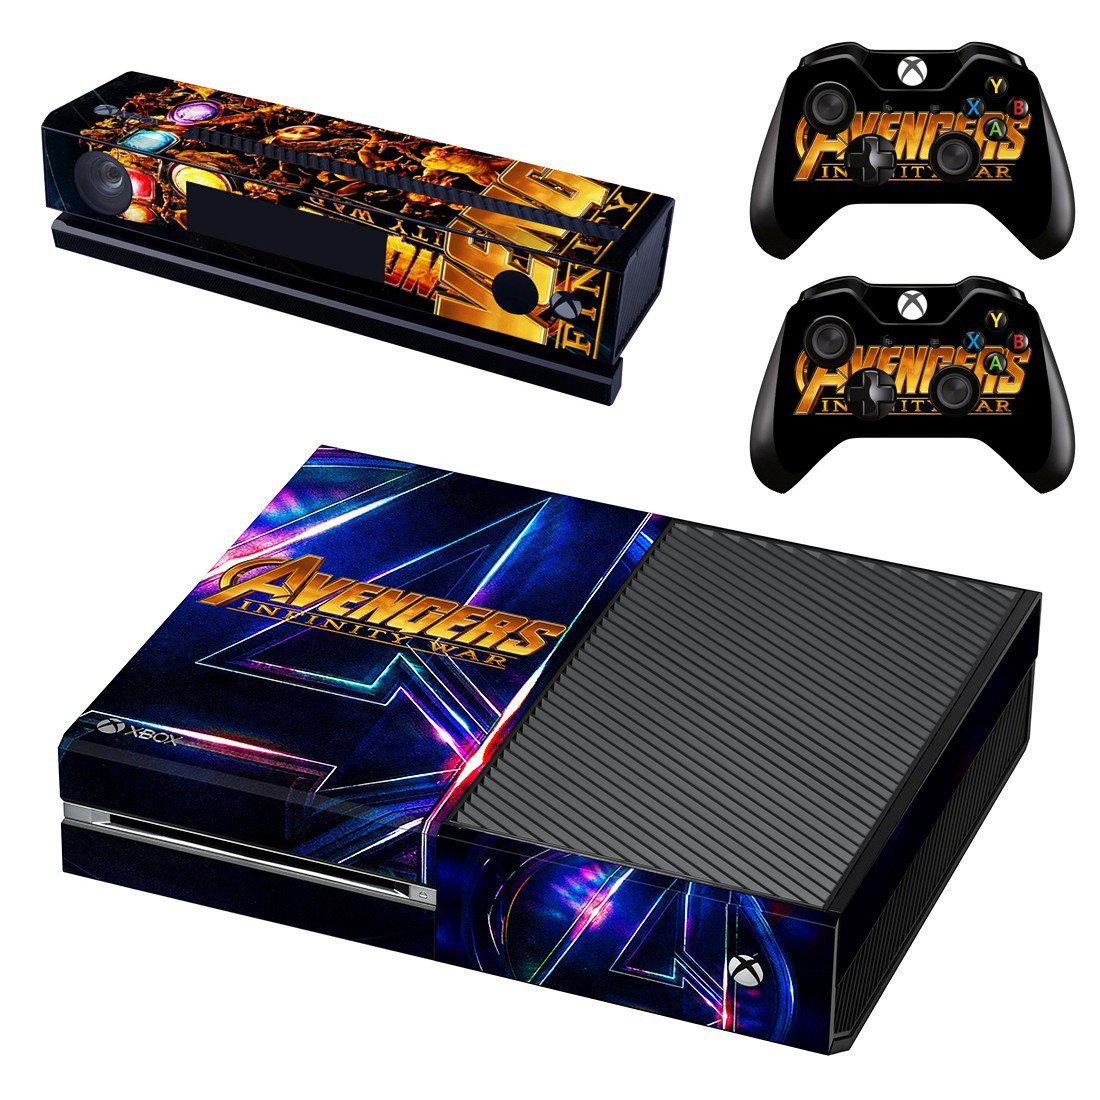 Xbox One And Controllers Skin Sticker - Avengers Infinity War